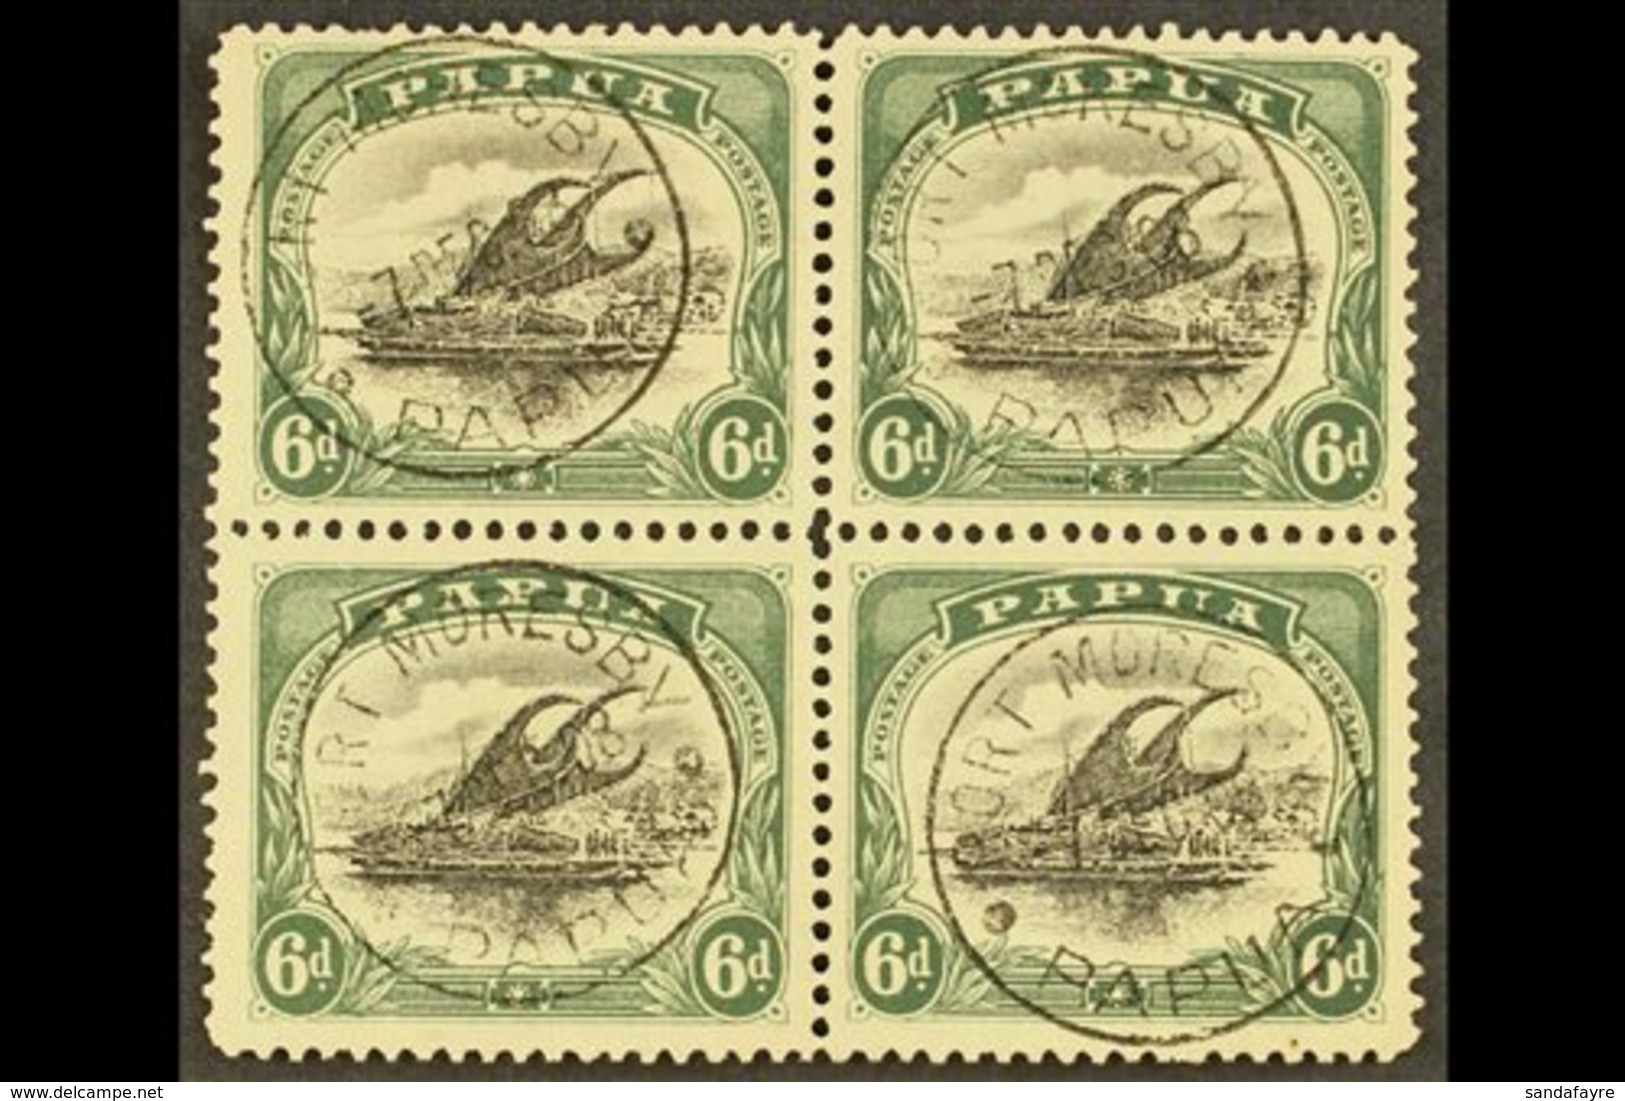 1907-98  Small Papua, Watermark Upright Perf 11 6d Black And Myrtle Green, SG 53, Superb Cds Used Block Of Four, Port Mo - Papúa Nueva Guinea